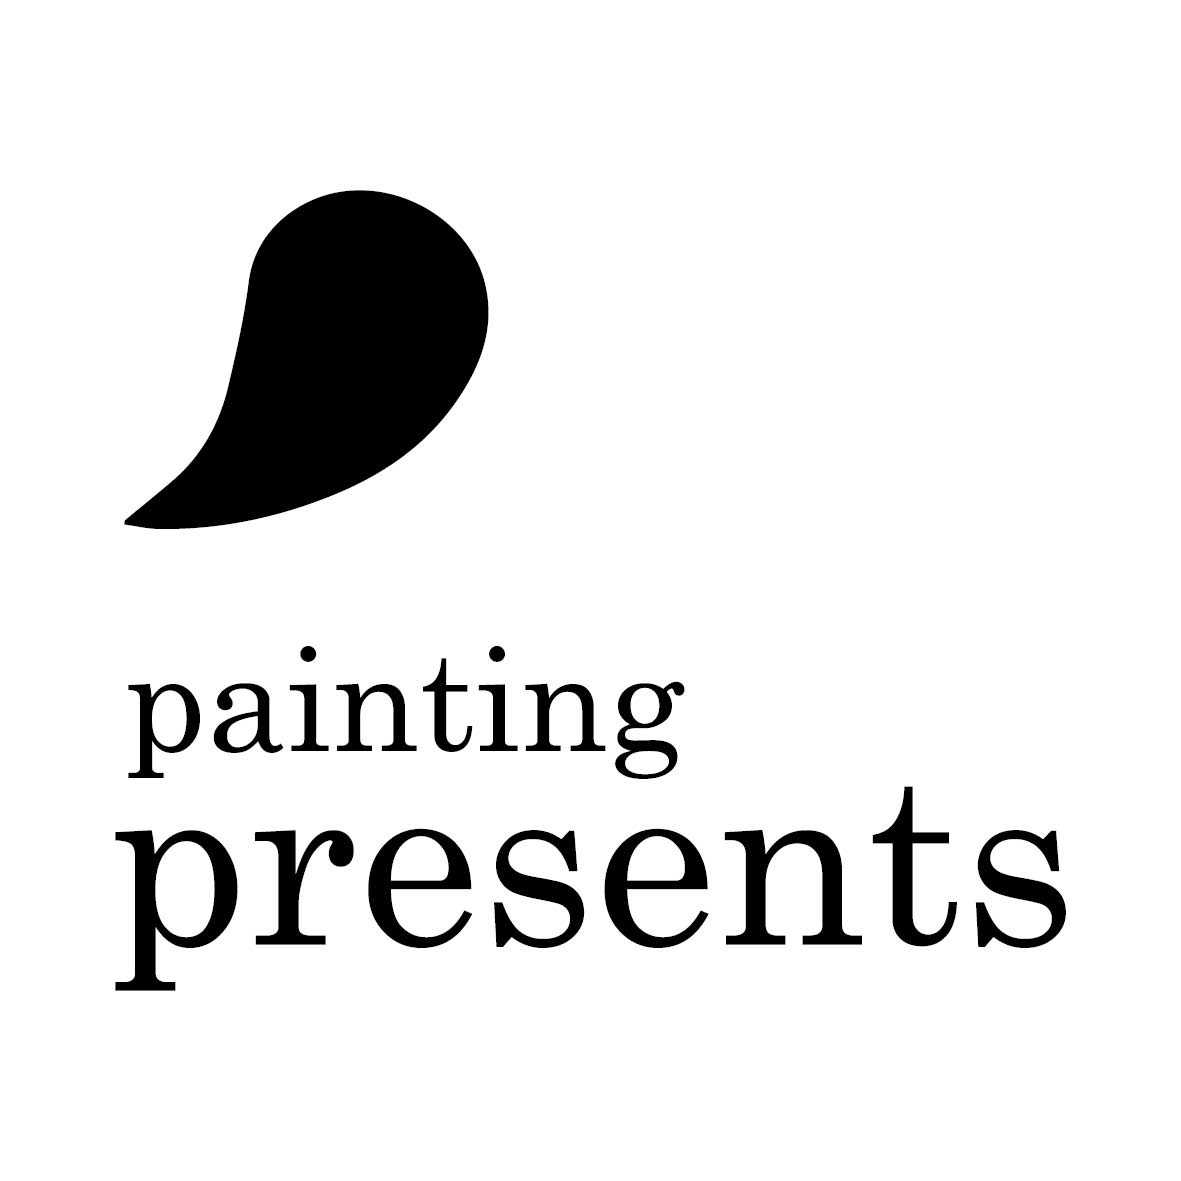 Painting presents